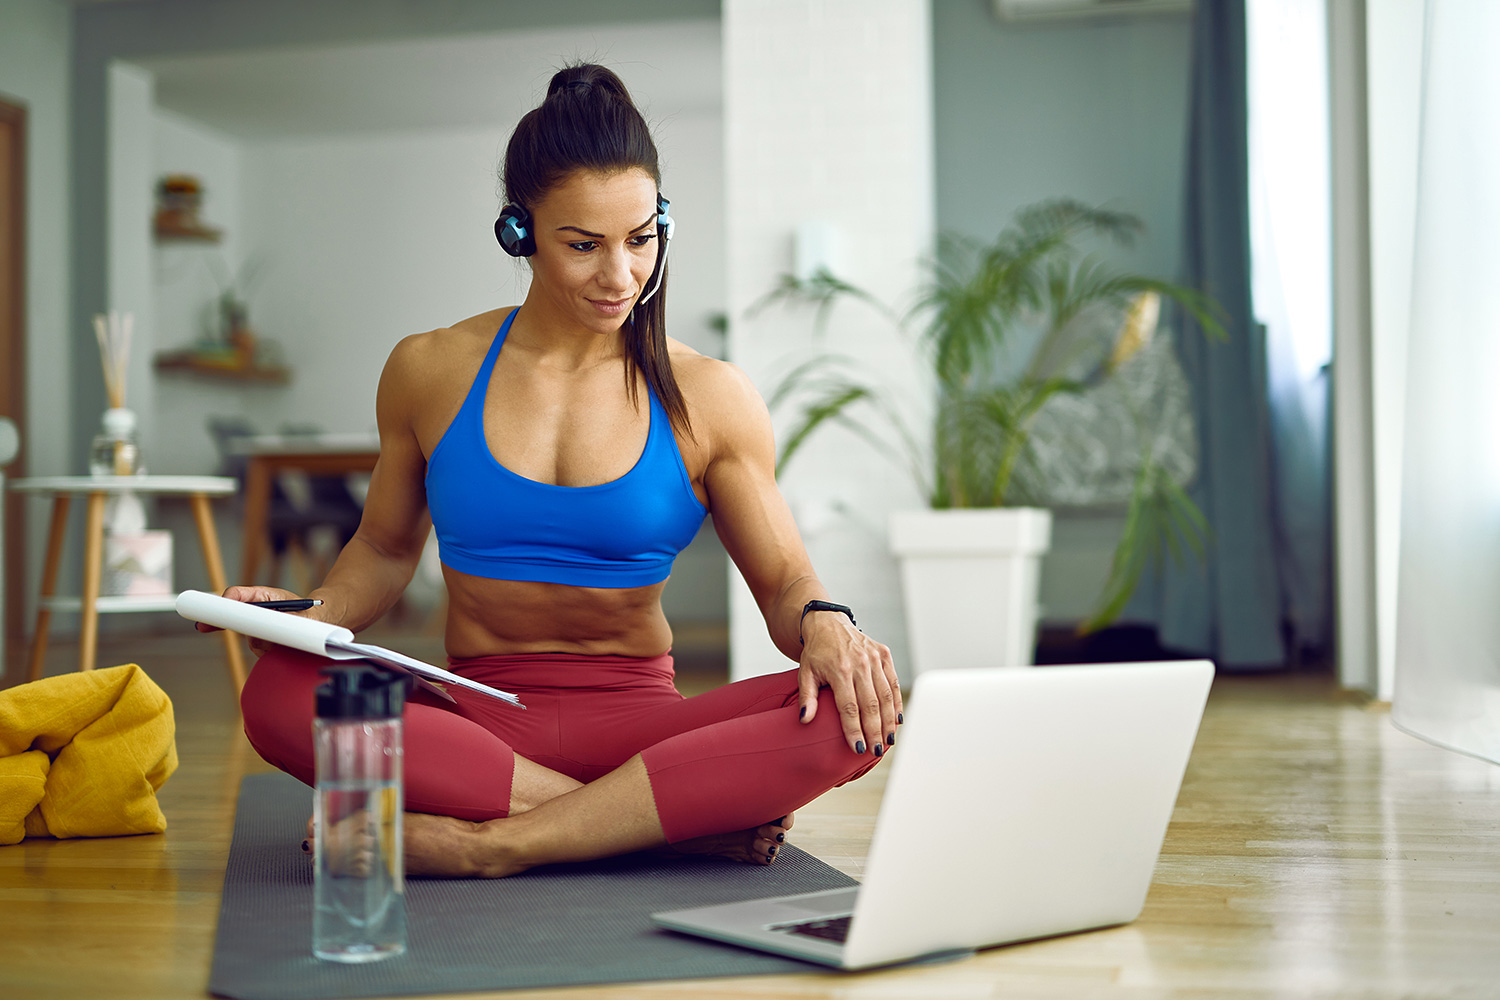 Does email marketing make sense for my fitness business?